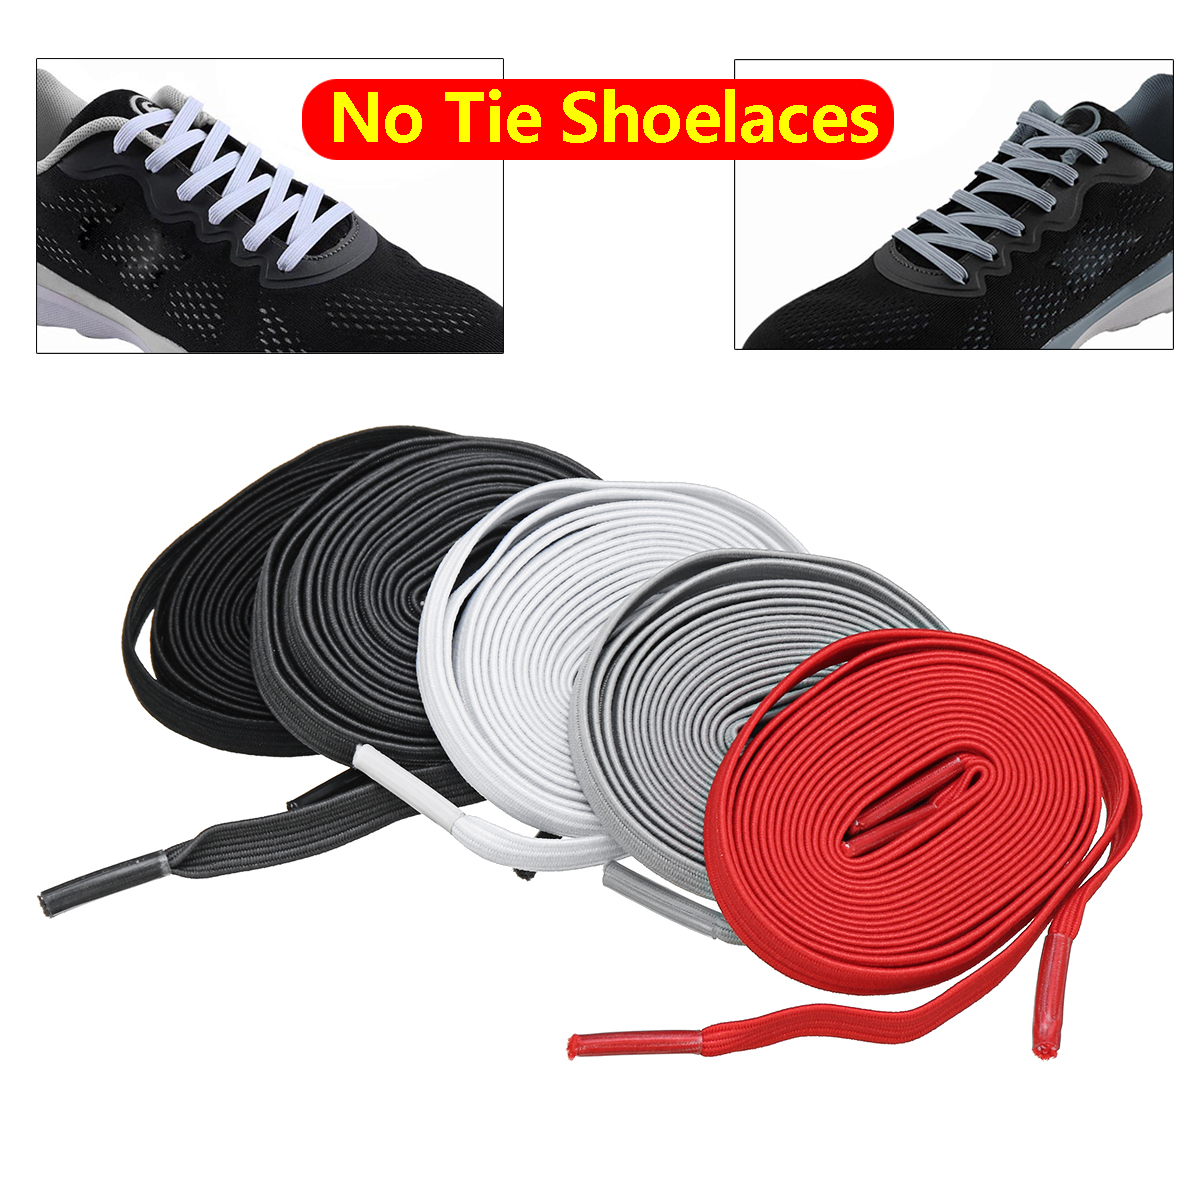 2Pcs-100cm-Elastic-No-Tie-Shoelaces-Lazy-Free-Tie-Sneaker-Laces-With-Buckles-Sports-Running-1470098-2